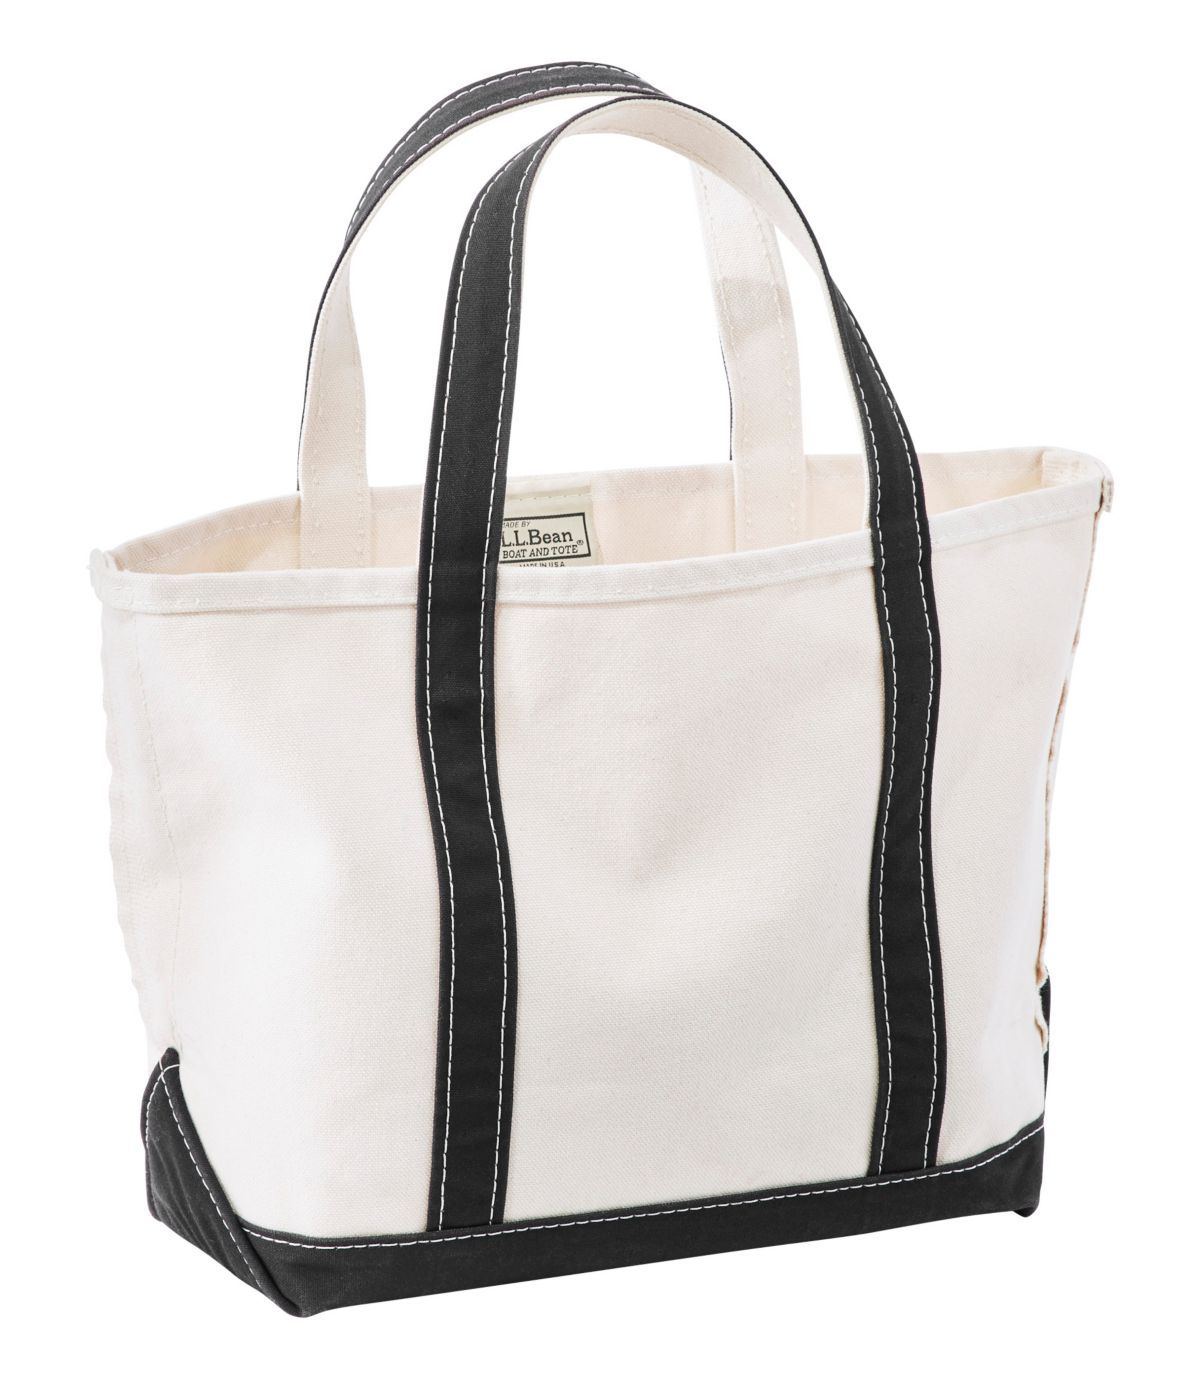 Boat and Tote®, Open-Top | L.L. Bean